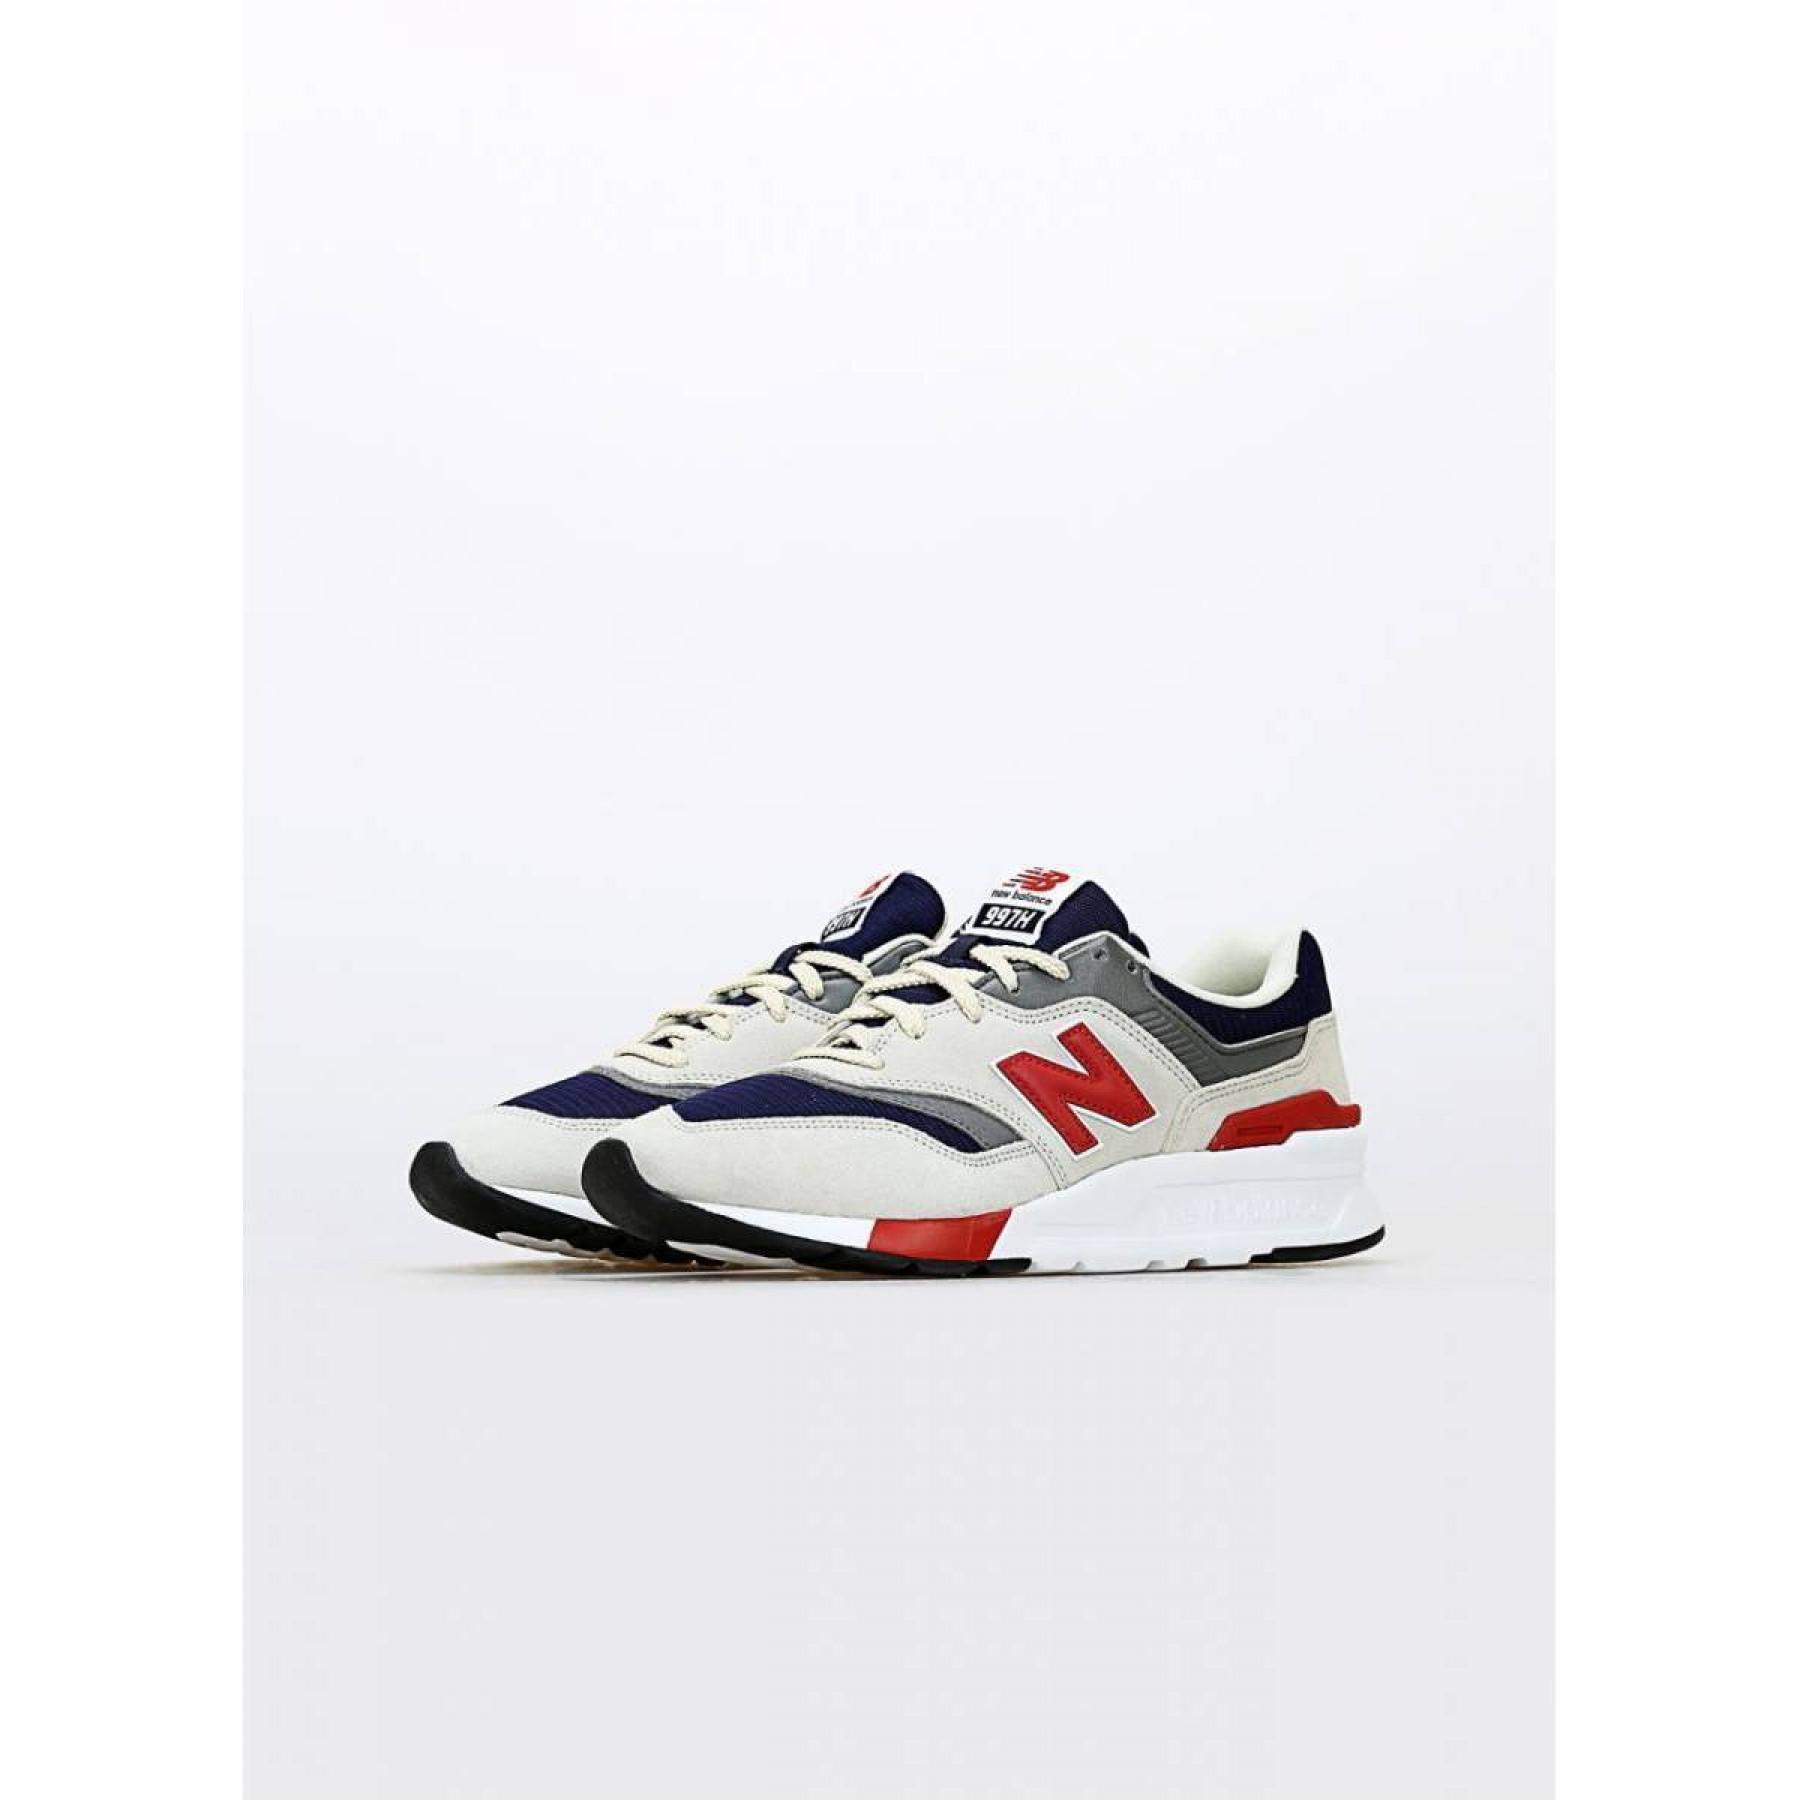 Formadores New Balance CM997 HEQ